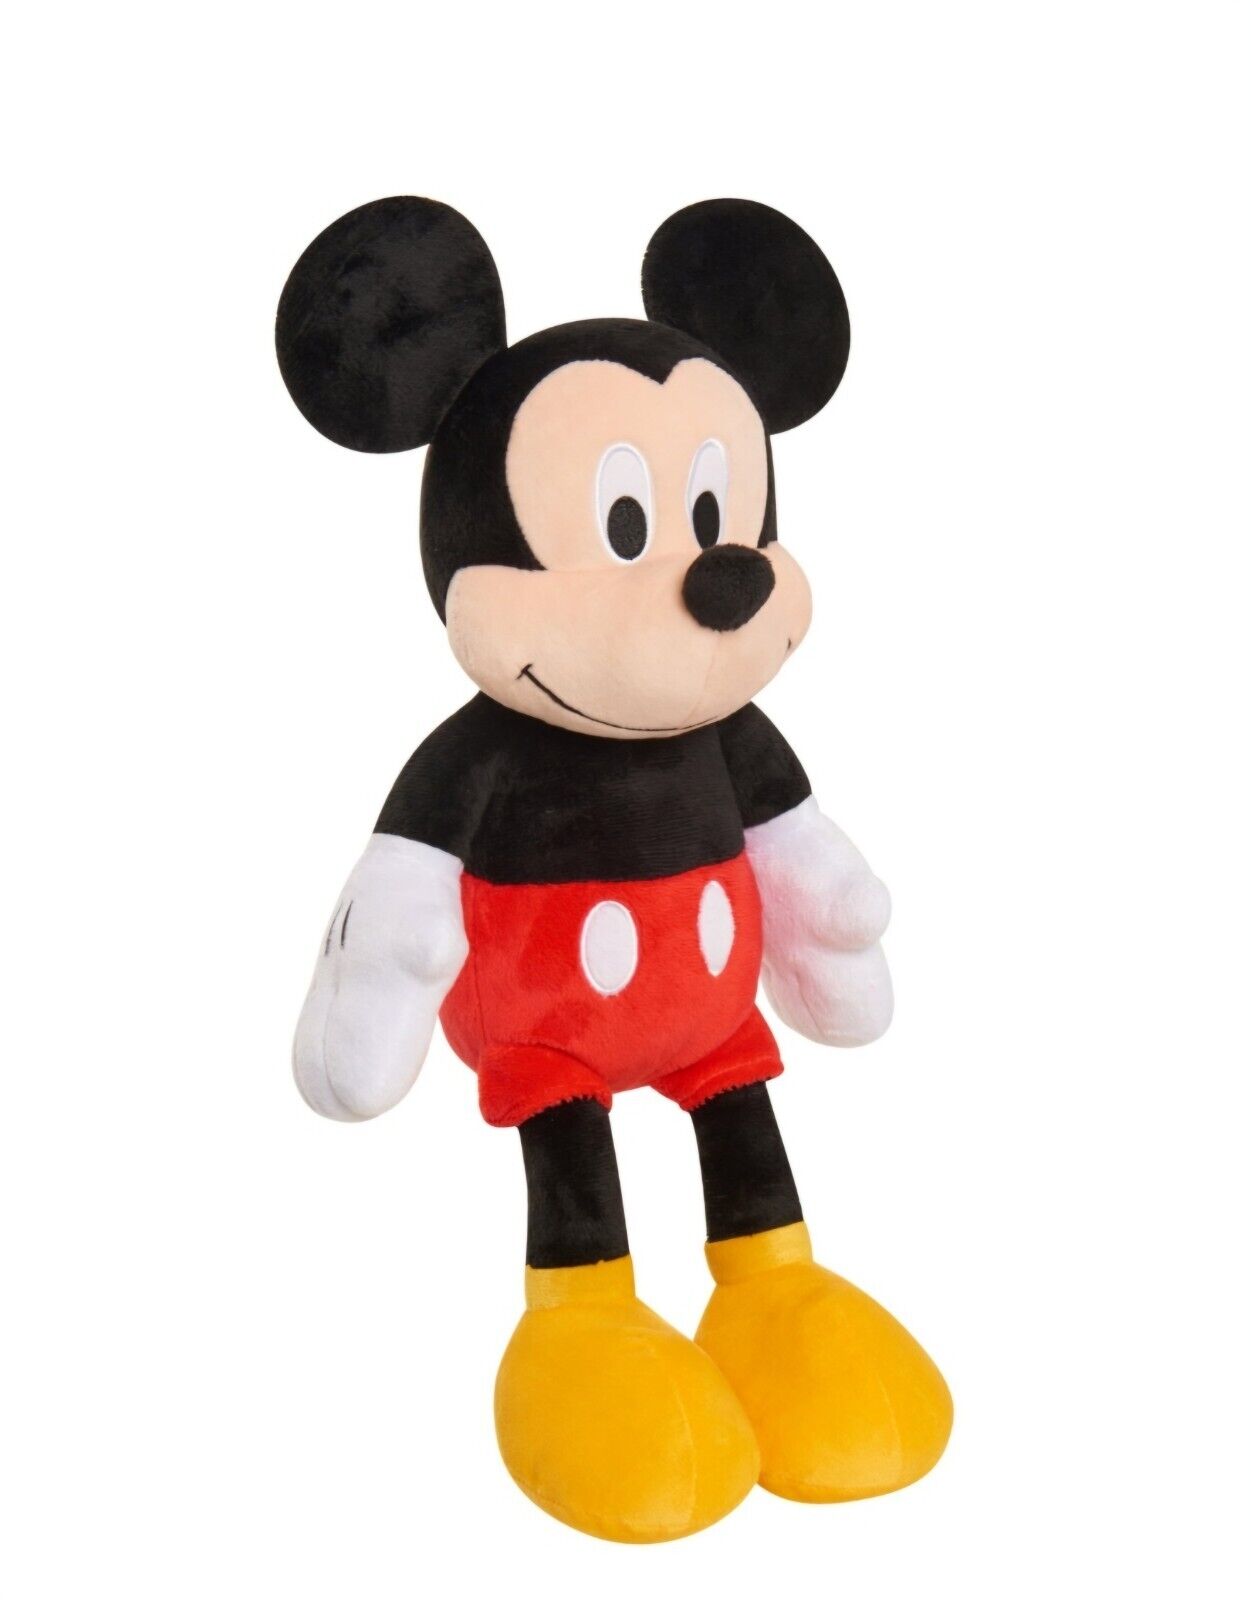 NEW Disney Mickey Mouse 19-inch Plush Stuffed Animal With Tags